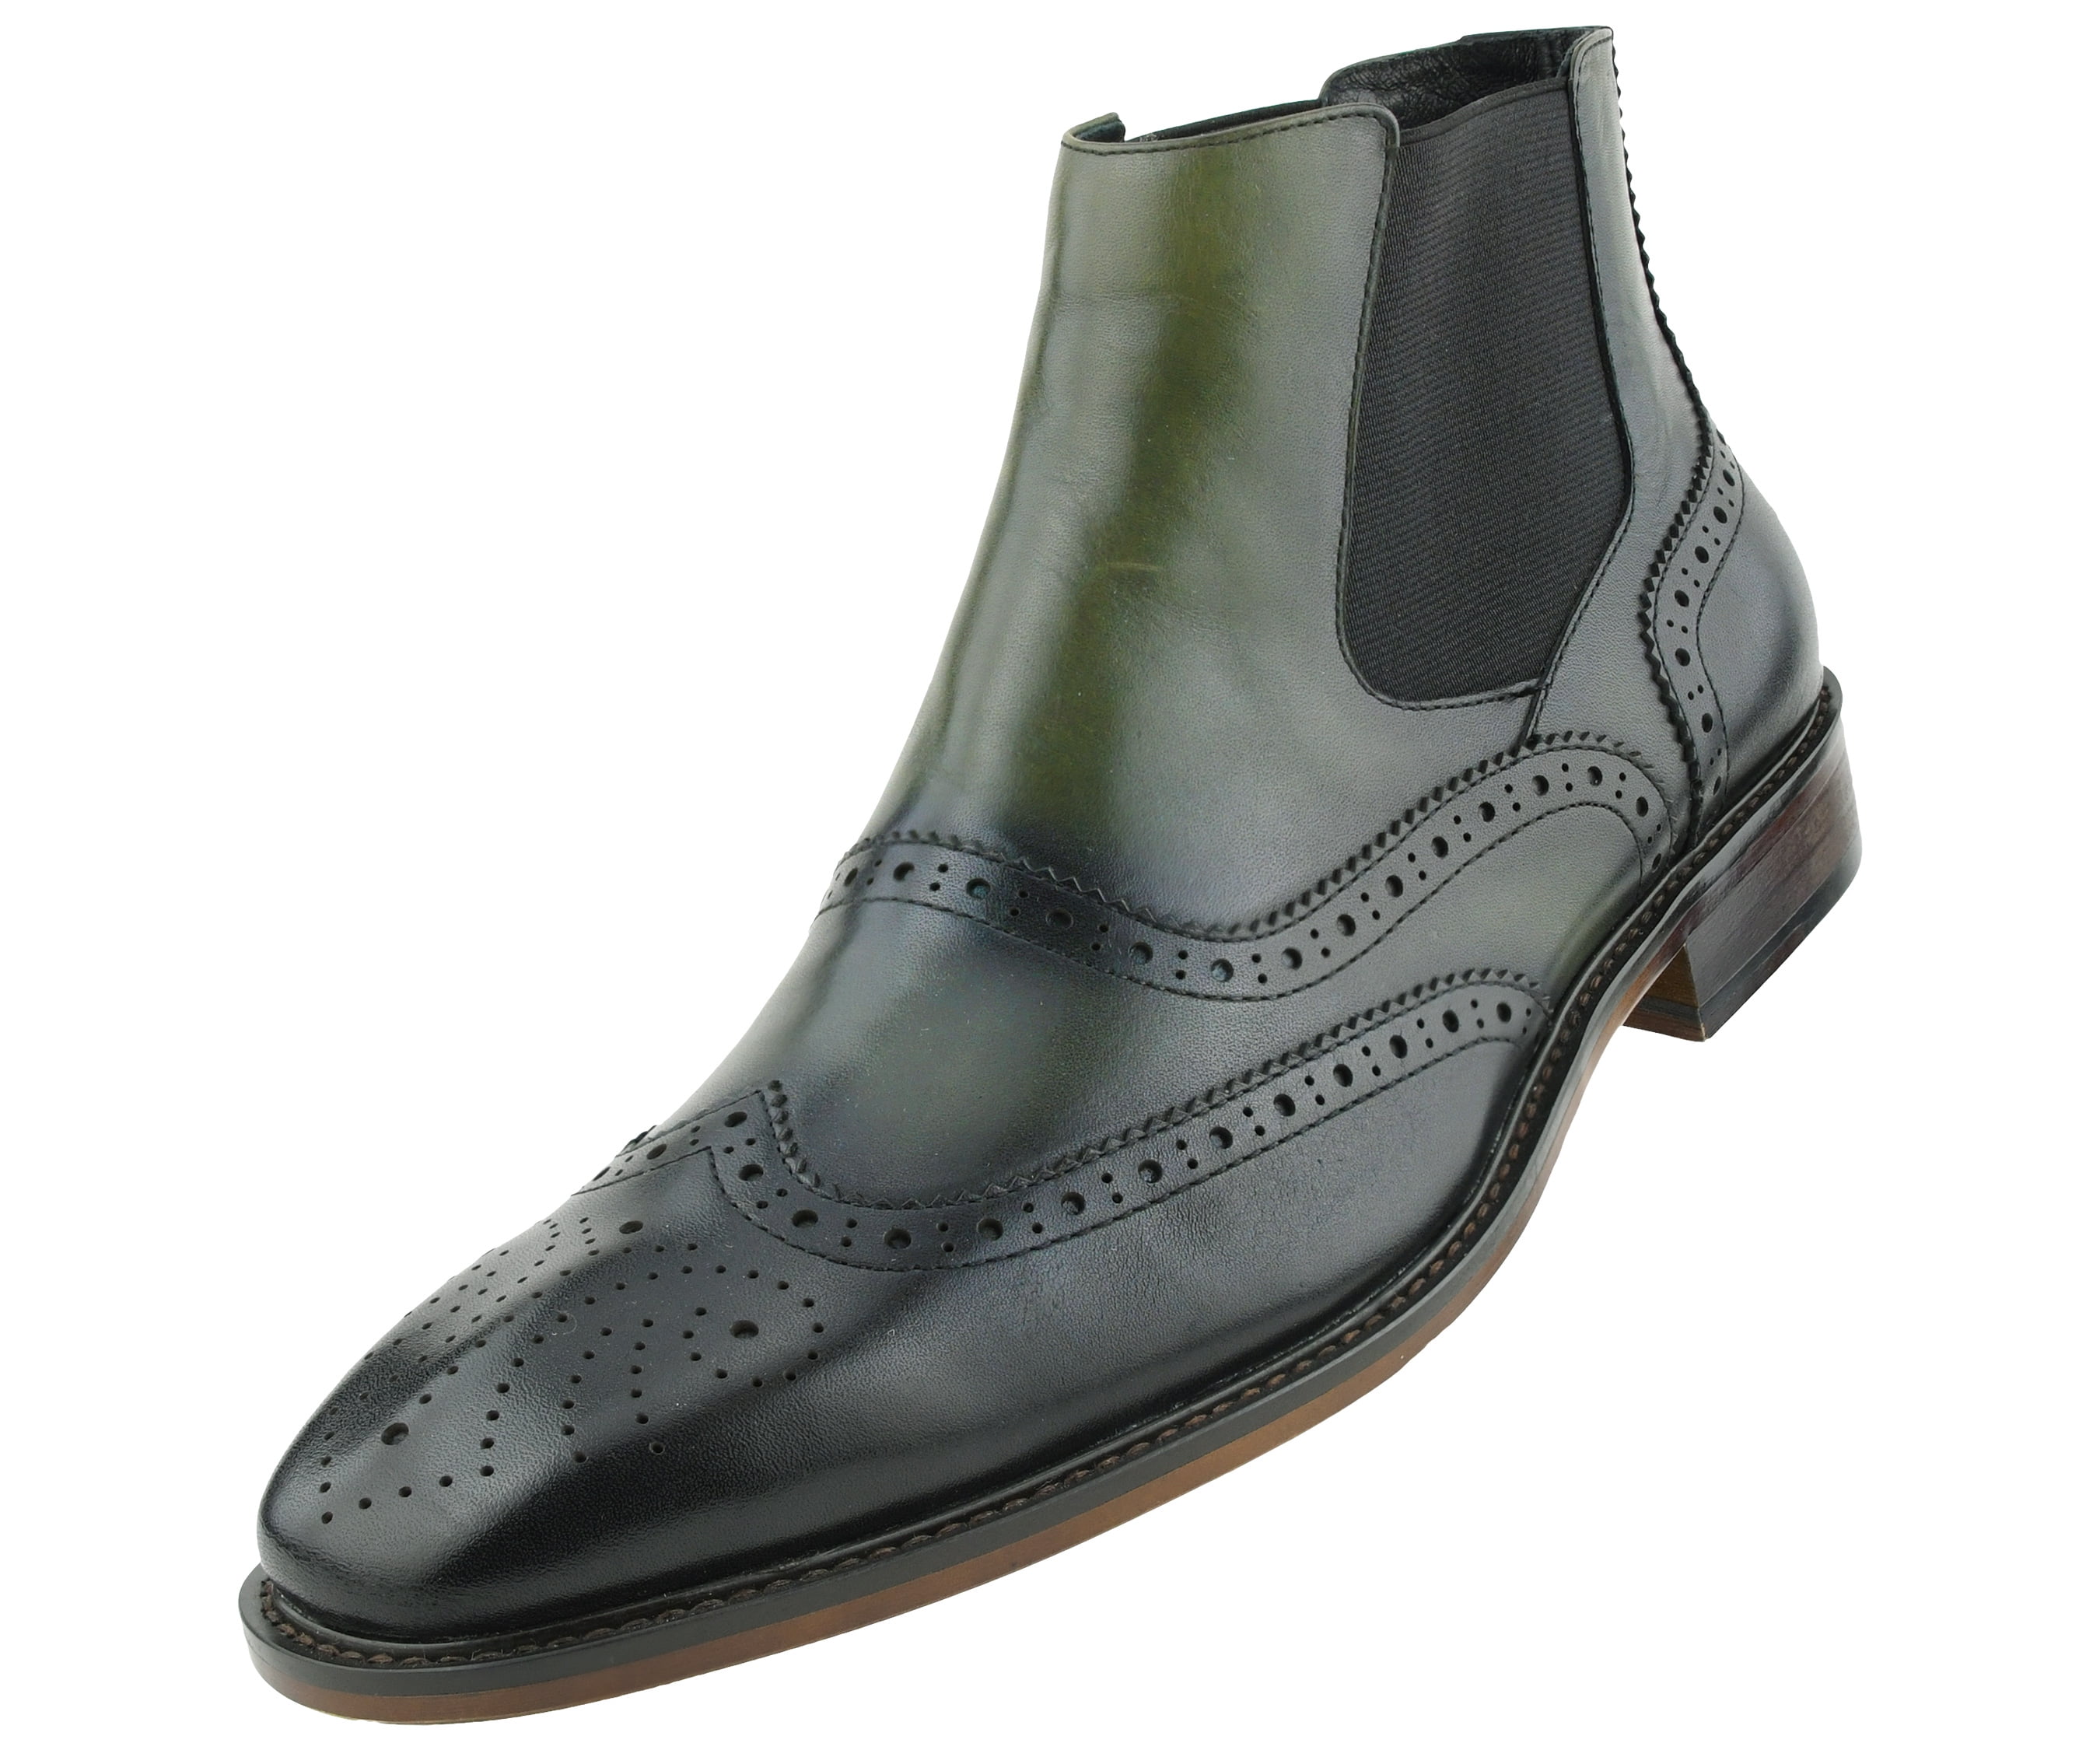 Style AG3291 Asher Green Original Mens Two Tone Chelsea Zipper Dress Boot Genuine Leather Perforated Wingtip Comfortable Stylish 